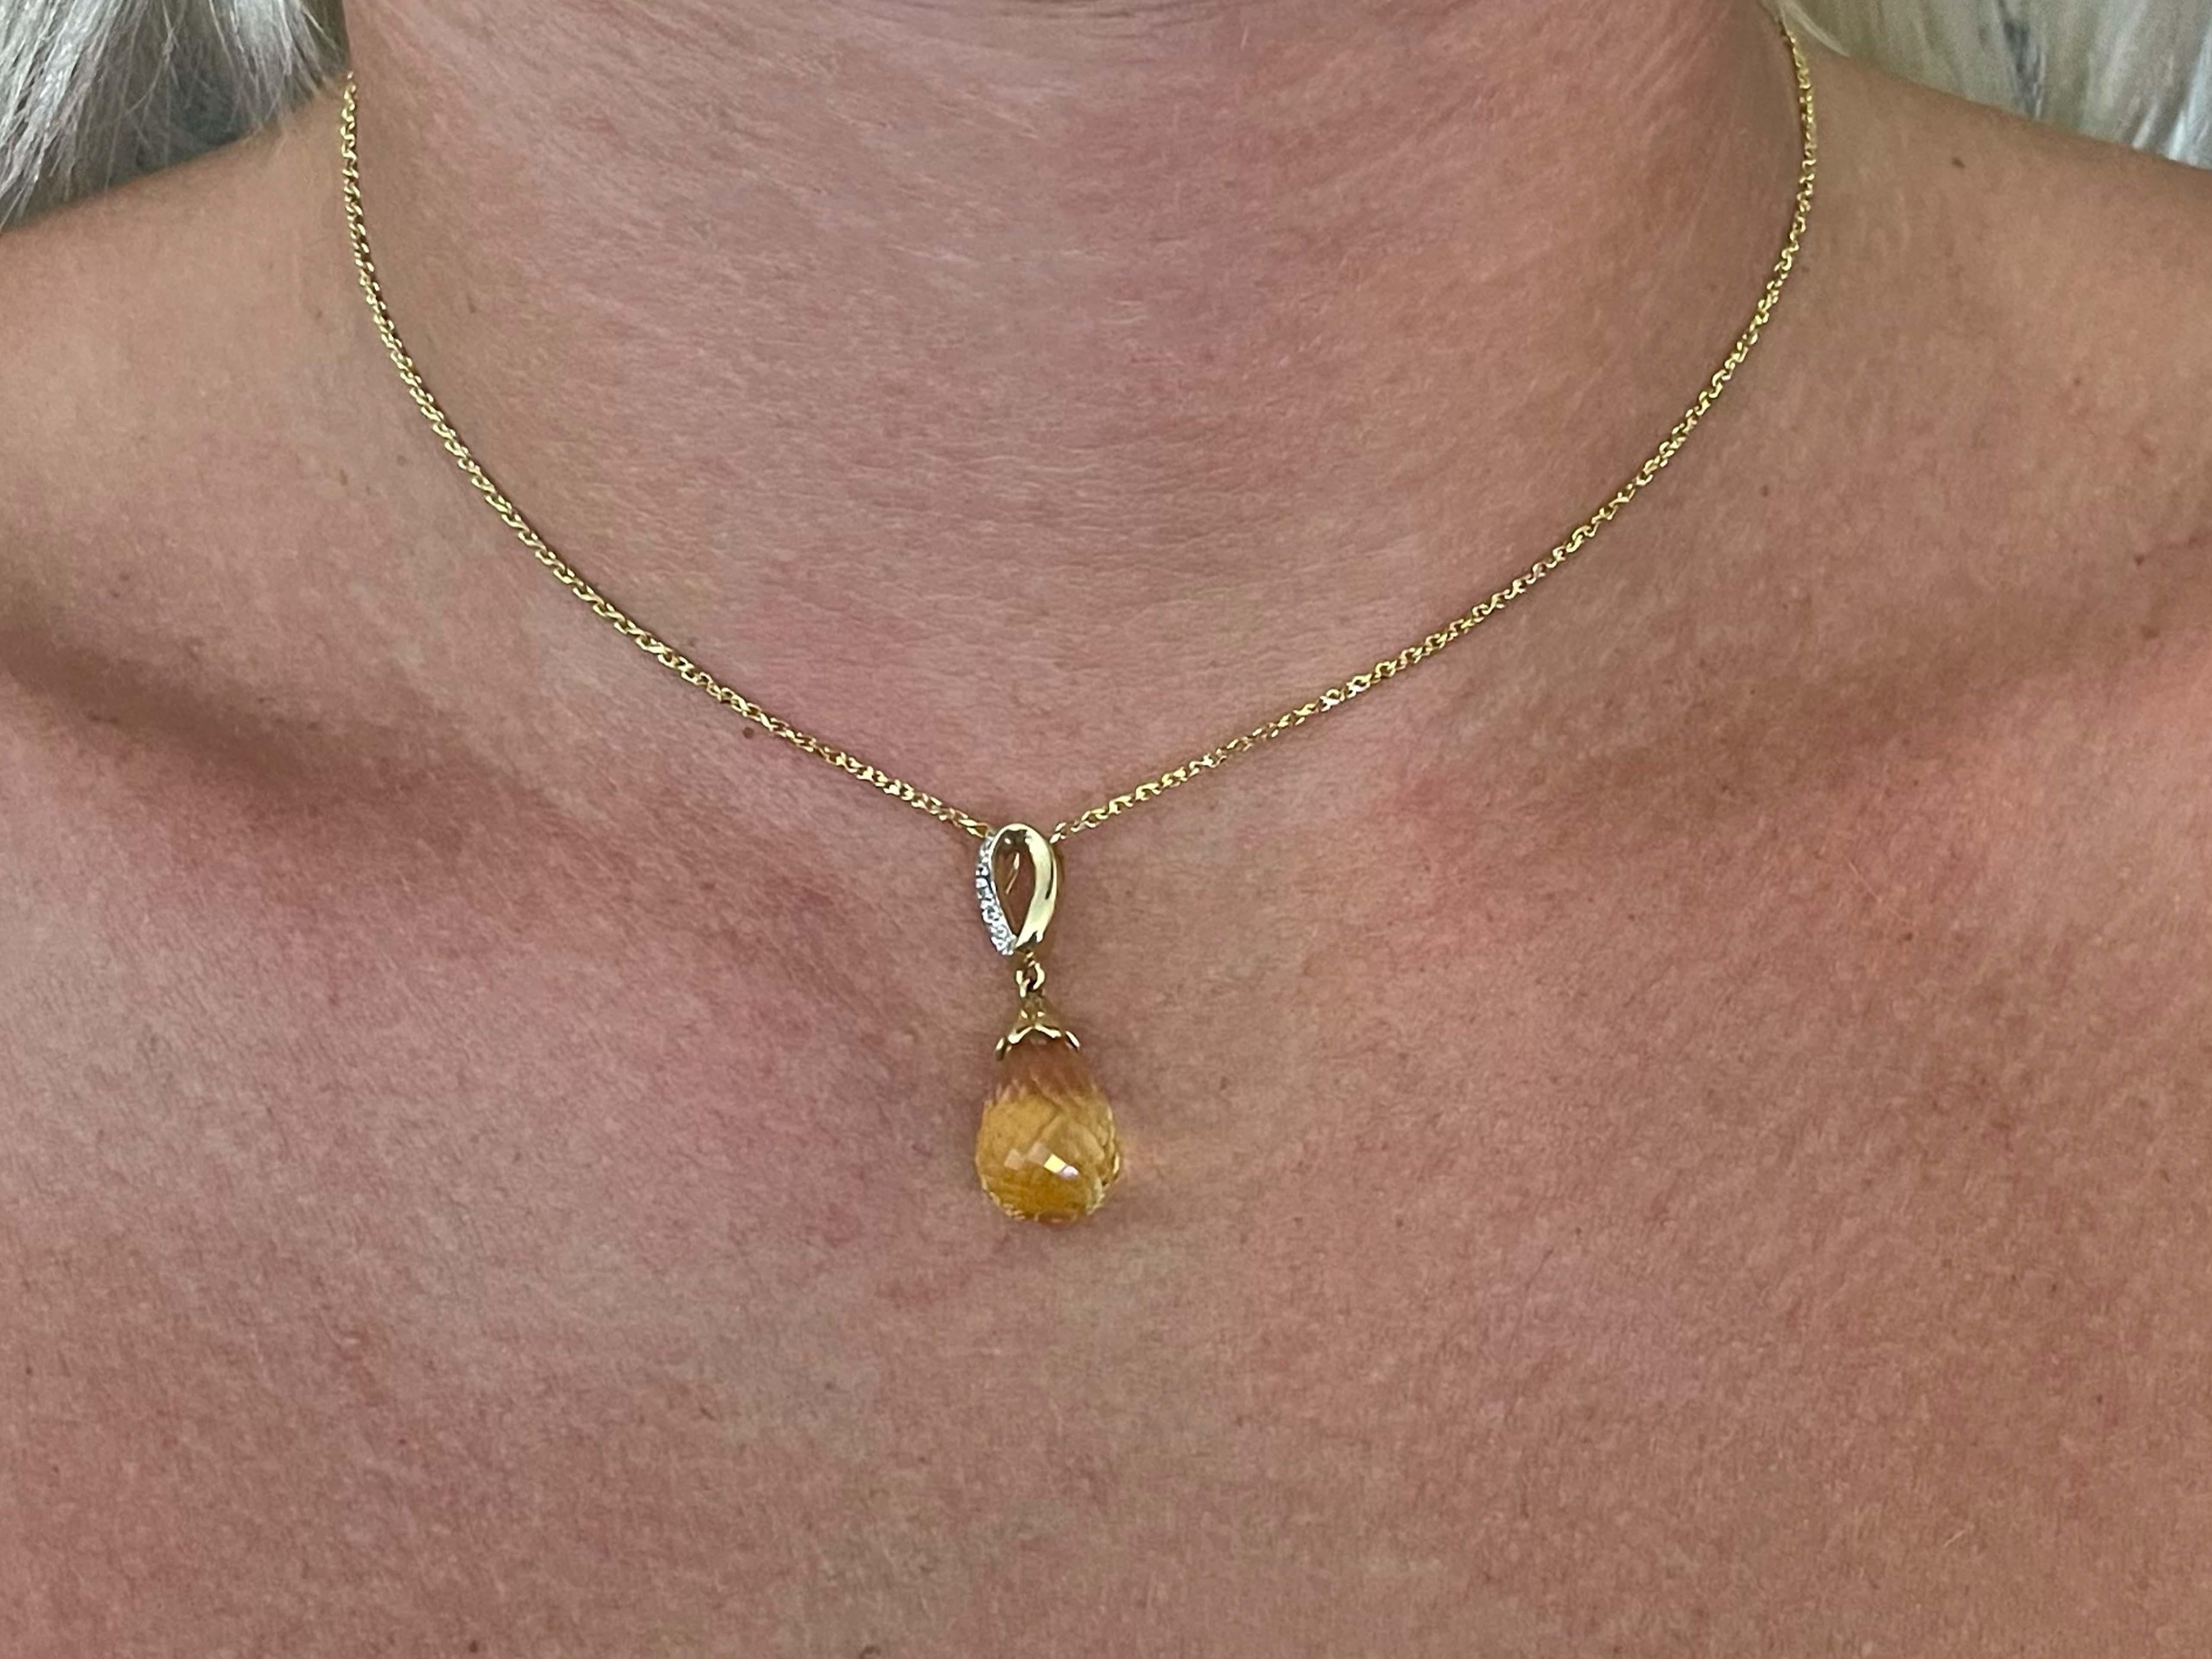 Create a touch of magic wearing this lovely citrine drop briolette necklace with diamonds. The 6 diamonds weigh 0.03 carats and are H color and SI2-I1 clarity. The pendant drops 1